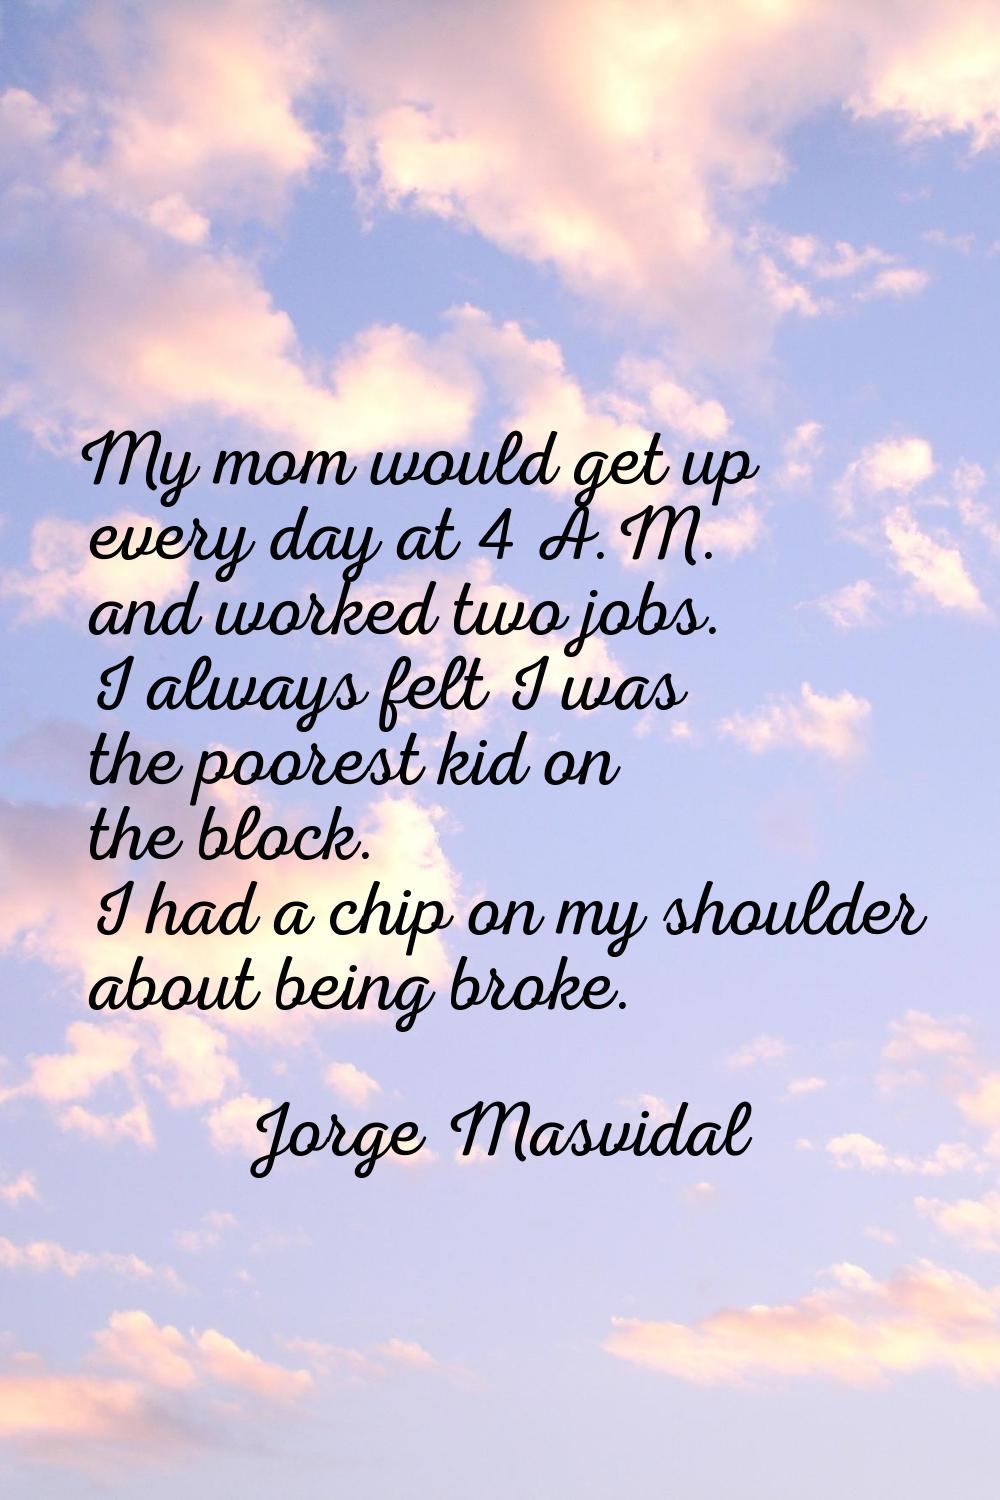 My mom would get up every day at 4 A.M. and worked two jobs. I always felt I was the poorest kid on